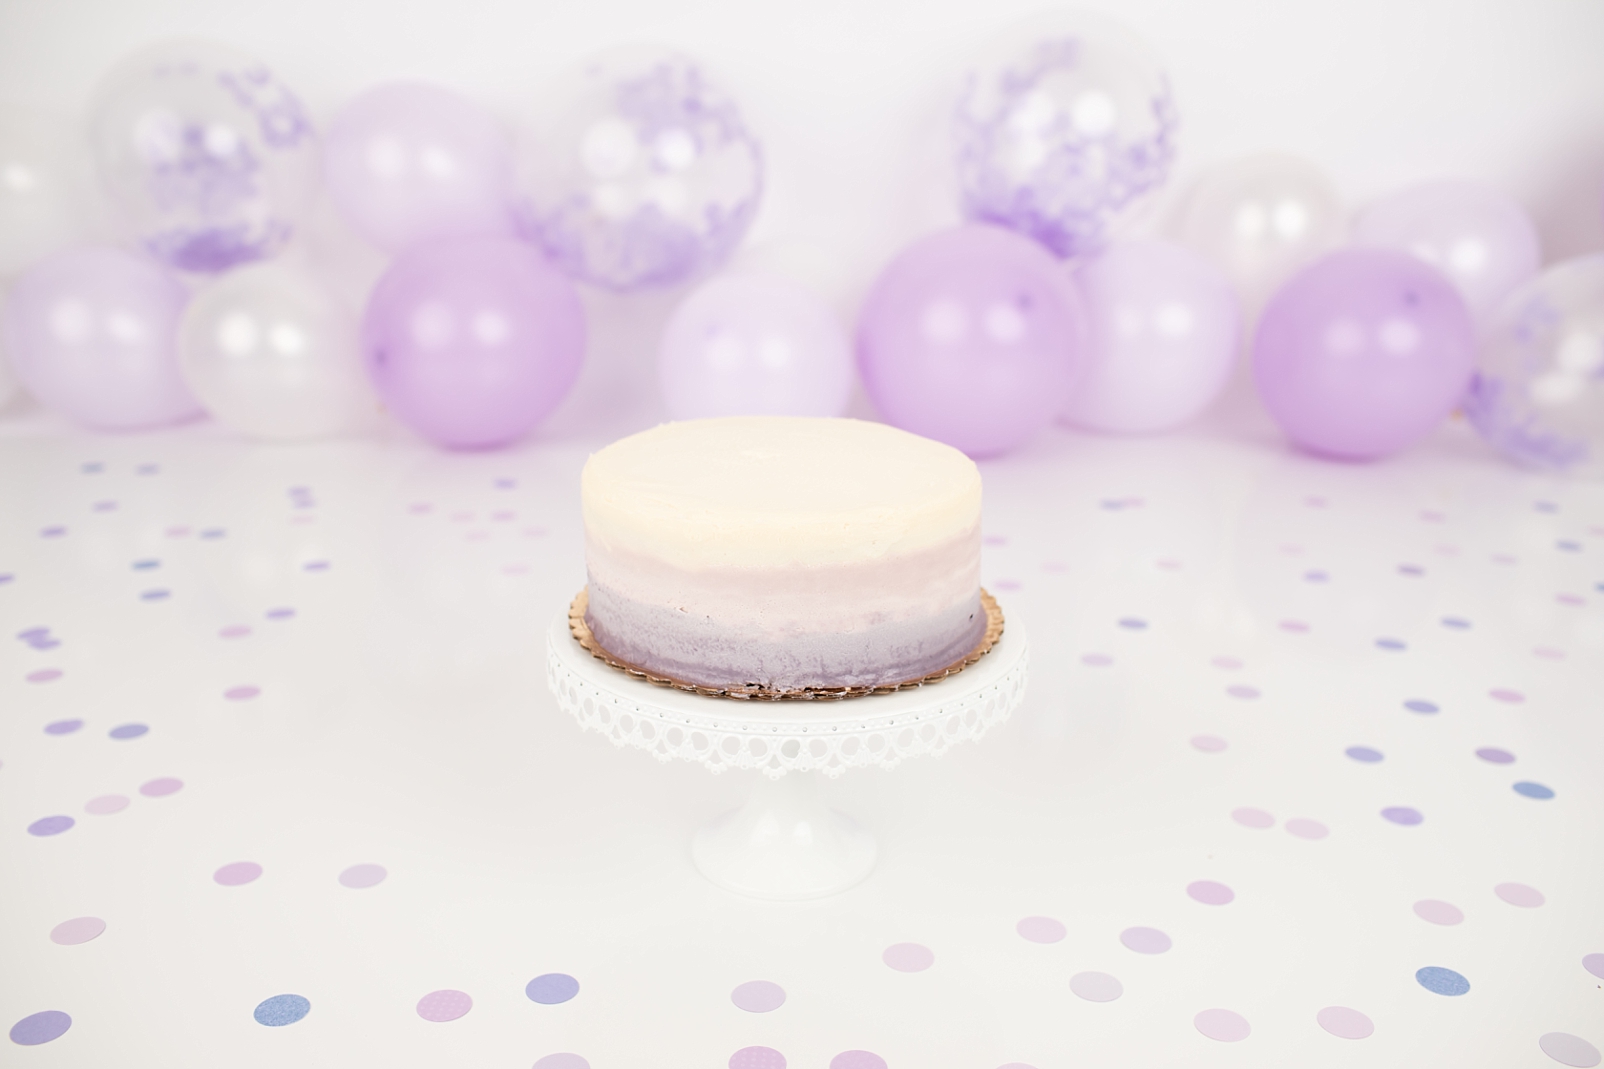 Ombre cake with lavender and polka dots and polka dot balloons | How to Choose a Smash Cake